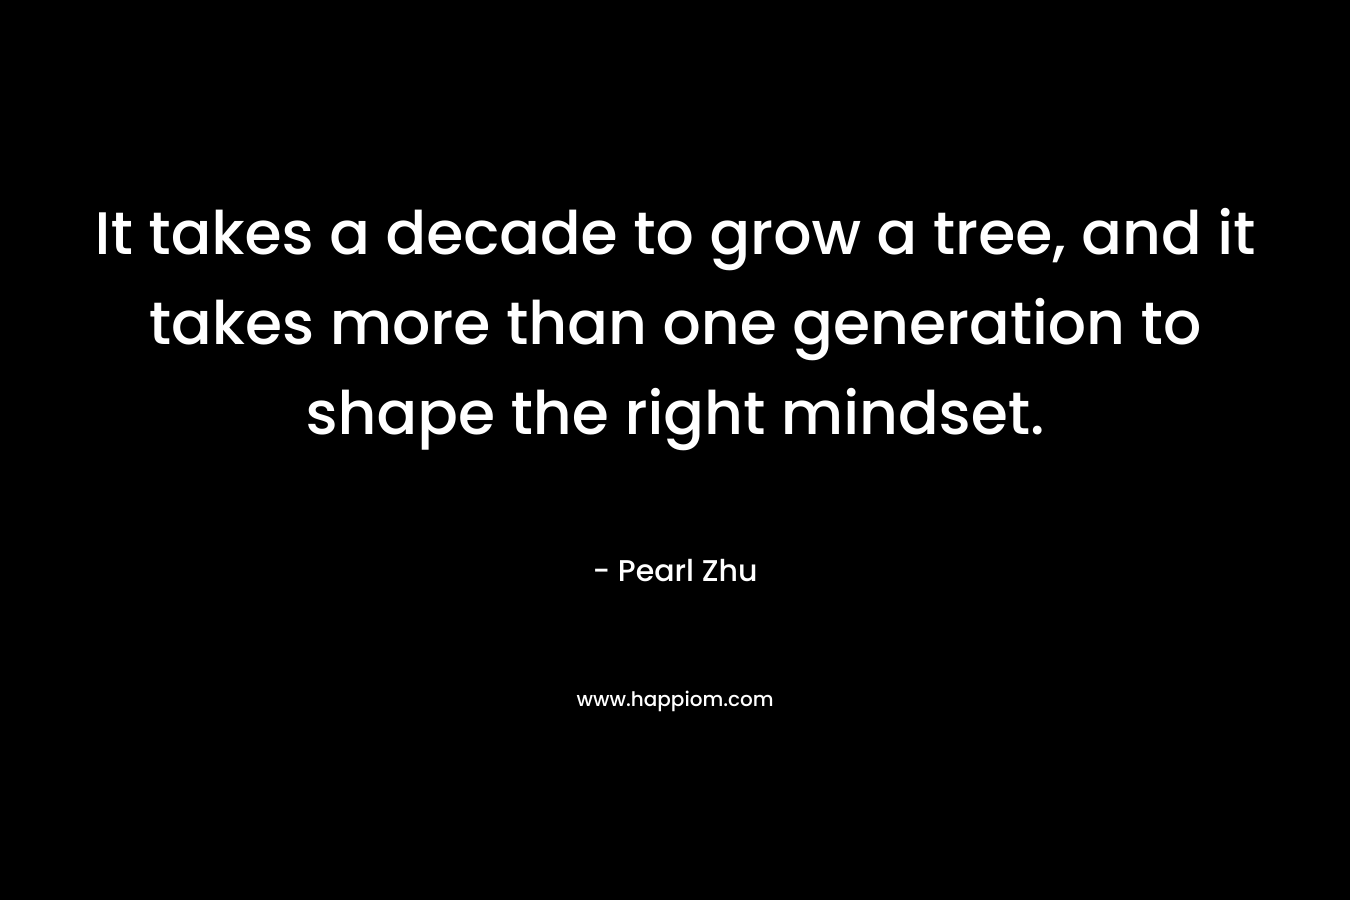 It takes a decade to grow a tree, and it takes more than one generation to shape the right mindset.